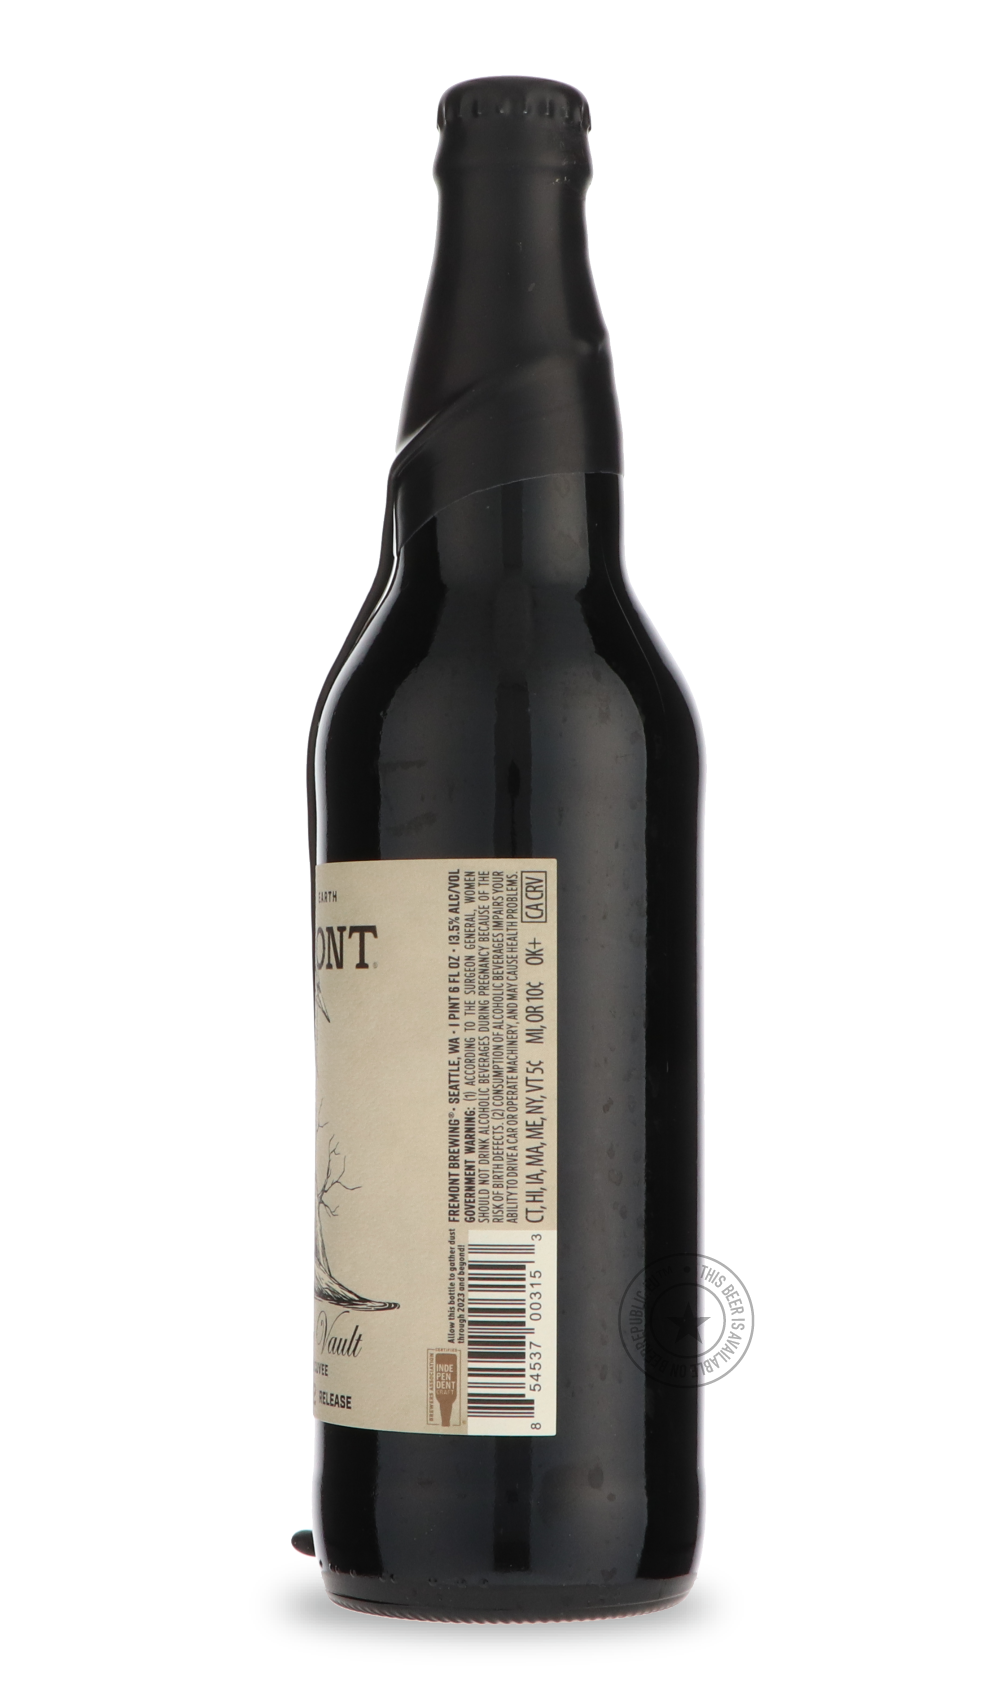 -Fremont- From the Vault 2022-Stout & Porter- Only @ Beer Republic - The best online beer store for American & Canadian craft beer - Buy beer online from the USA and Canada - Bier online kopen - Amerikaans bier kopen - Craft beer store - Craft beer kopen - Amerikanisch bier kaufen - Bier online kaufen - Acheter biere online - IPA - Stout - Porter - New England IPA - Hazy IPA - Imperial Stout - Barrel Aged - Barrel Aged Imperial Stout - Brown - Dark beer - Blond - Blonde - Pilsner - Lager - Wheat - Weizen - 